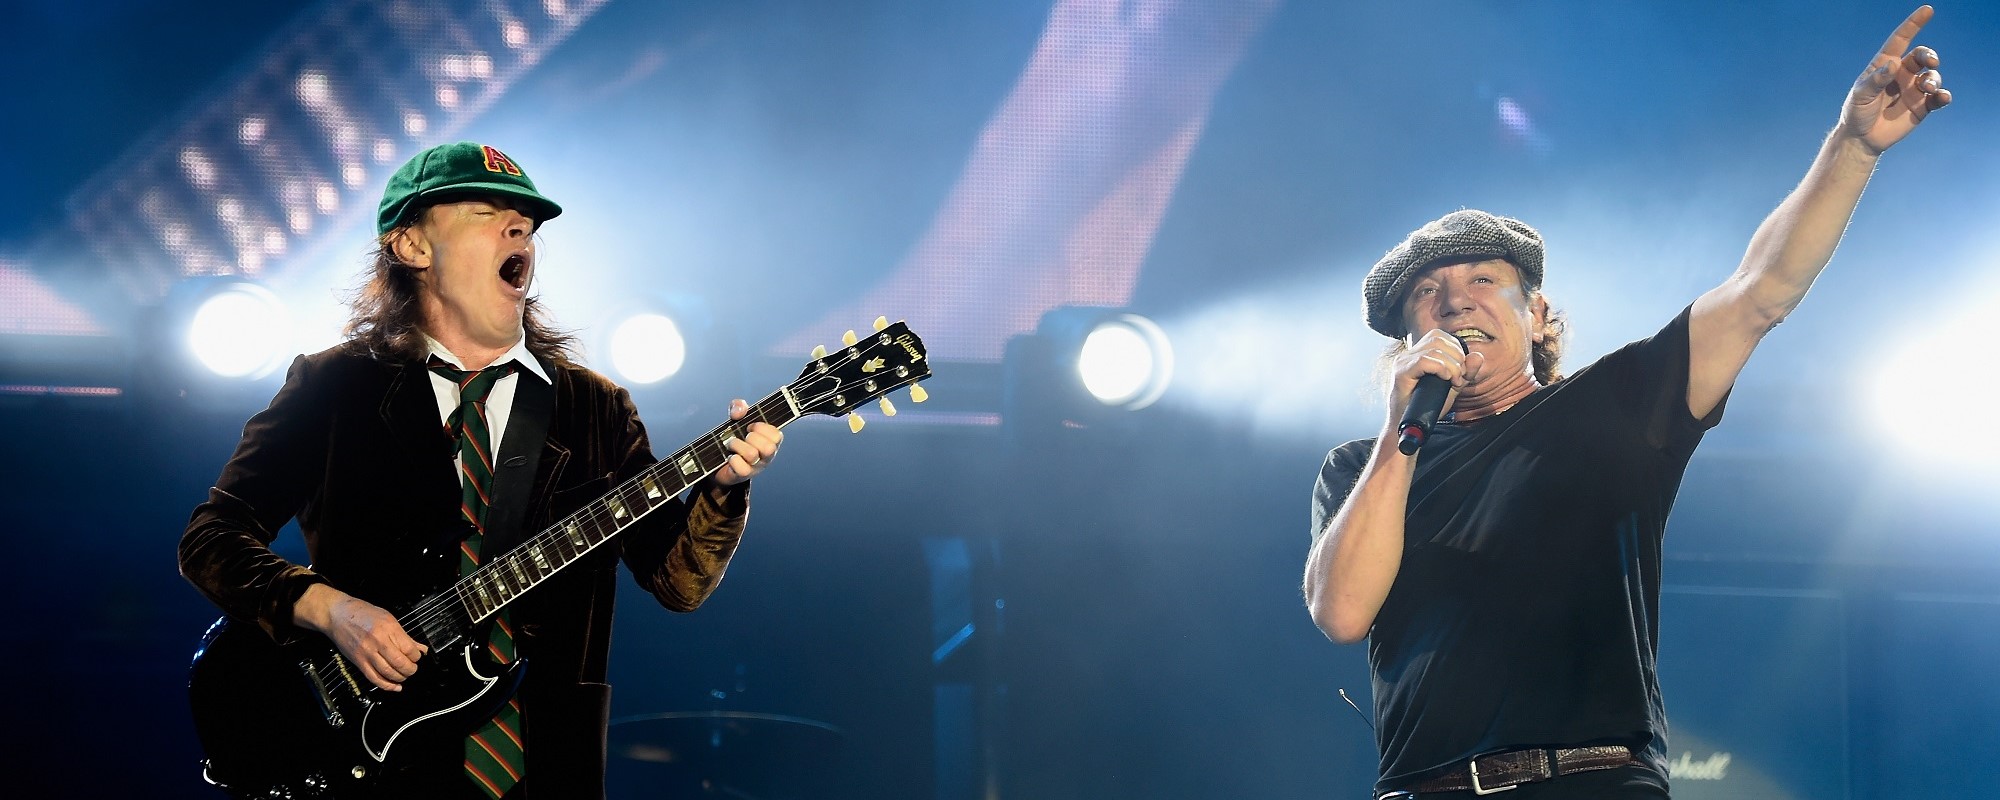 Those About to Rock: Check Out the First Photo of AC/DC’s New Touring Lineup